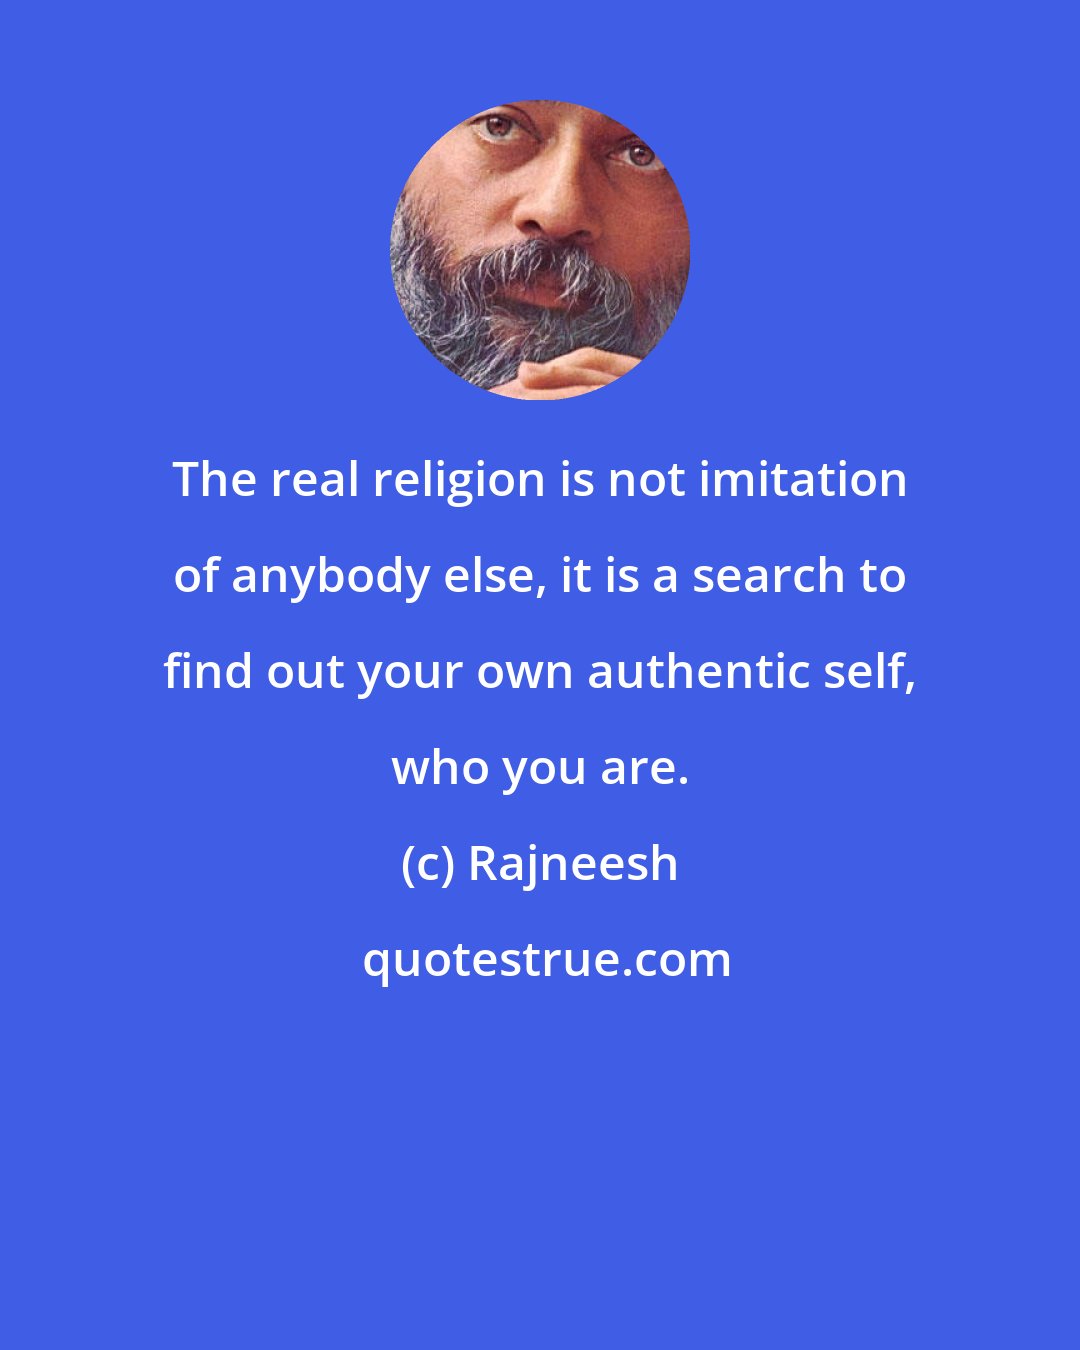 Rajneesh: The real religion is not imitation of anybody else, it is a search to find out your own authentic self, who you are.